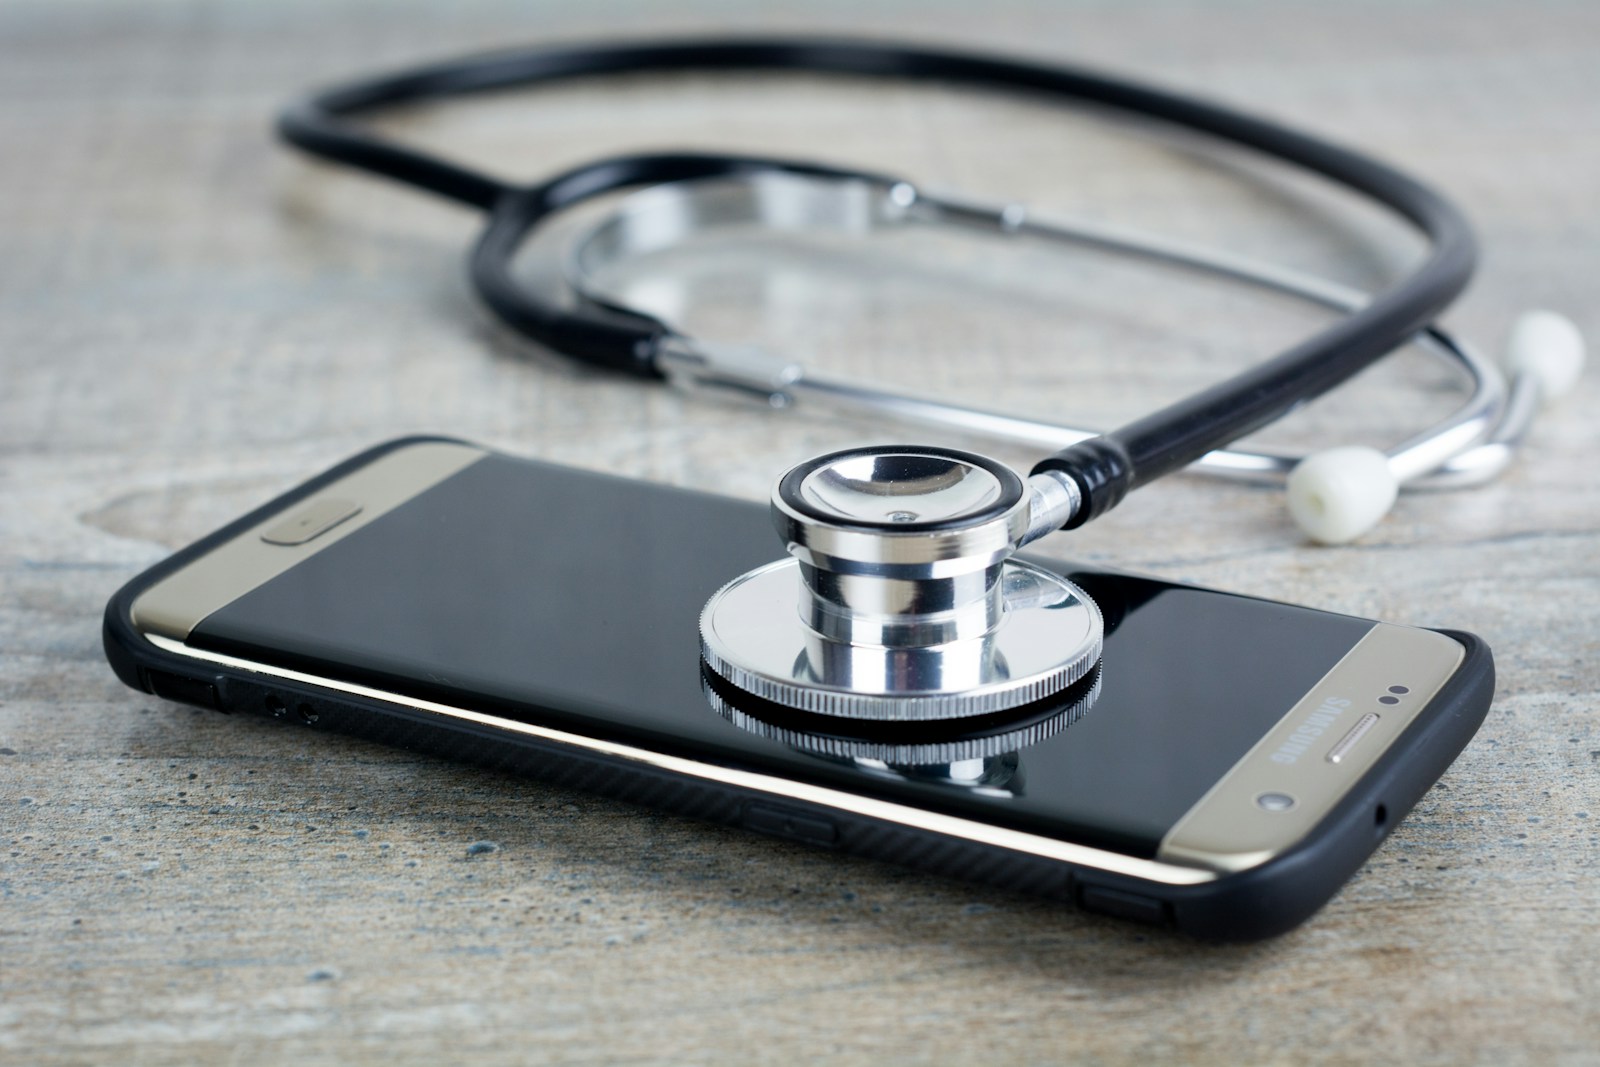 Mobile Health Applications